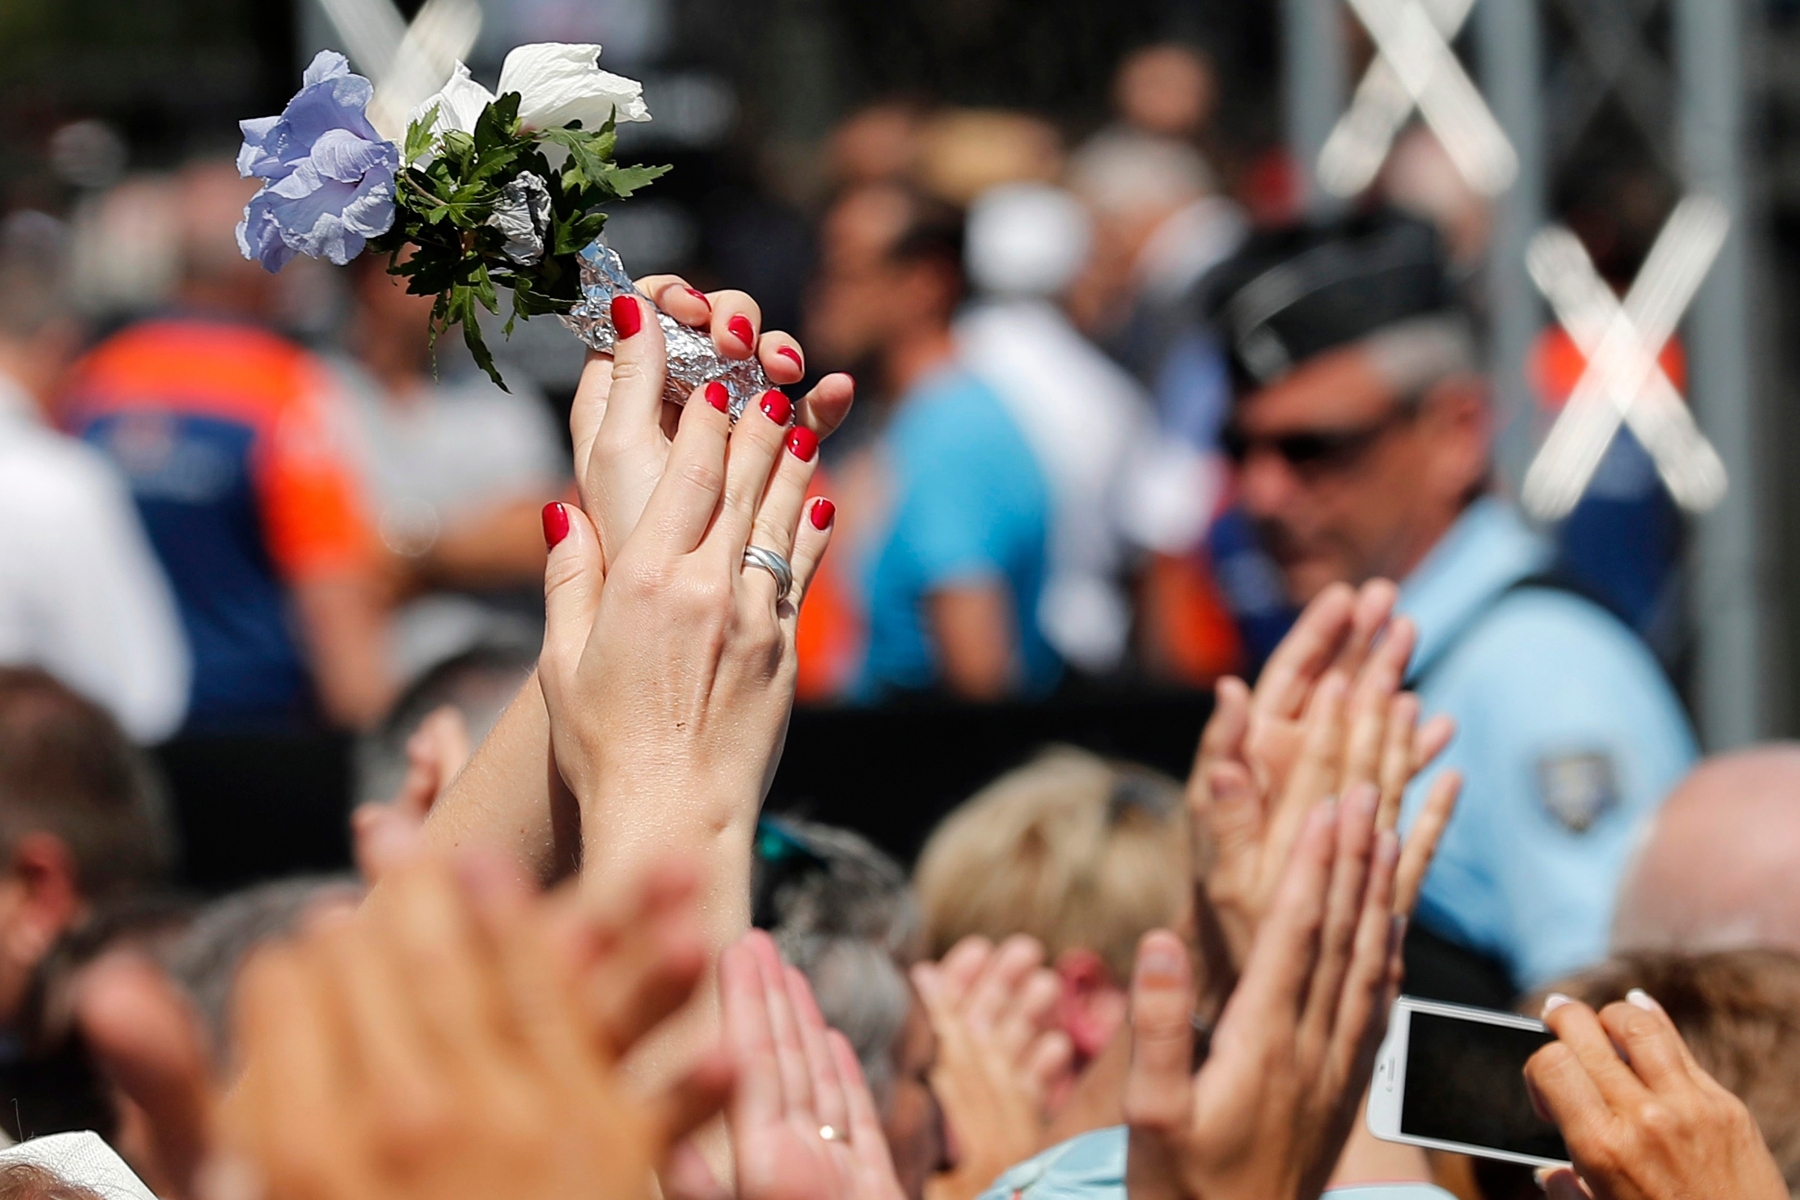 People give applause to police officers and rescue team after a minute of silence on the famed Promenade des Anglais in Nice, southern France, to honor the victims of an attack near the area where a truck mowed through revelers, Monday, July 18, 2016. France is holding a national moment of silence for 84 people killed by a truck rampage in Nice, and thousands of people are massed on the waterfront promenade where Bastille Day celebrations became a killing field.(AP Photo/Francois Mori) France Truck Attack